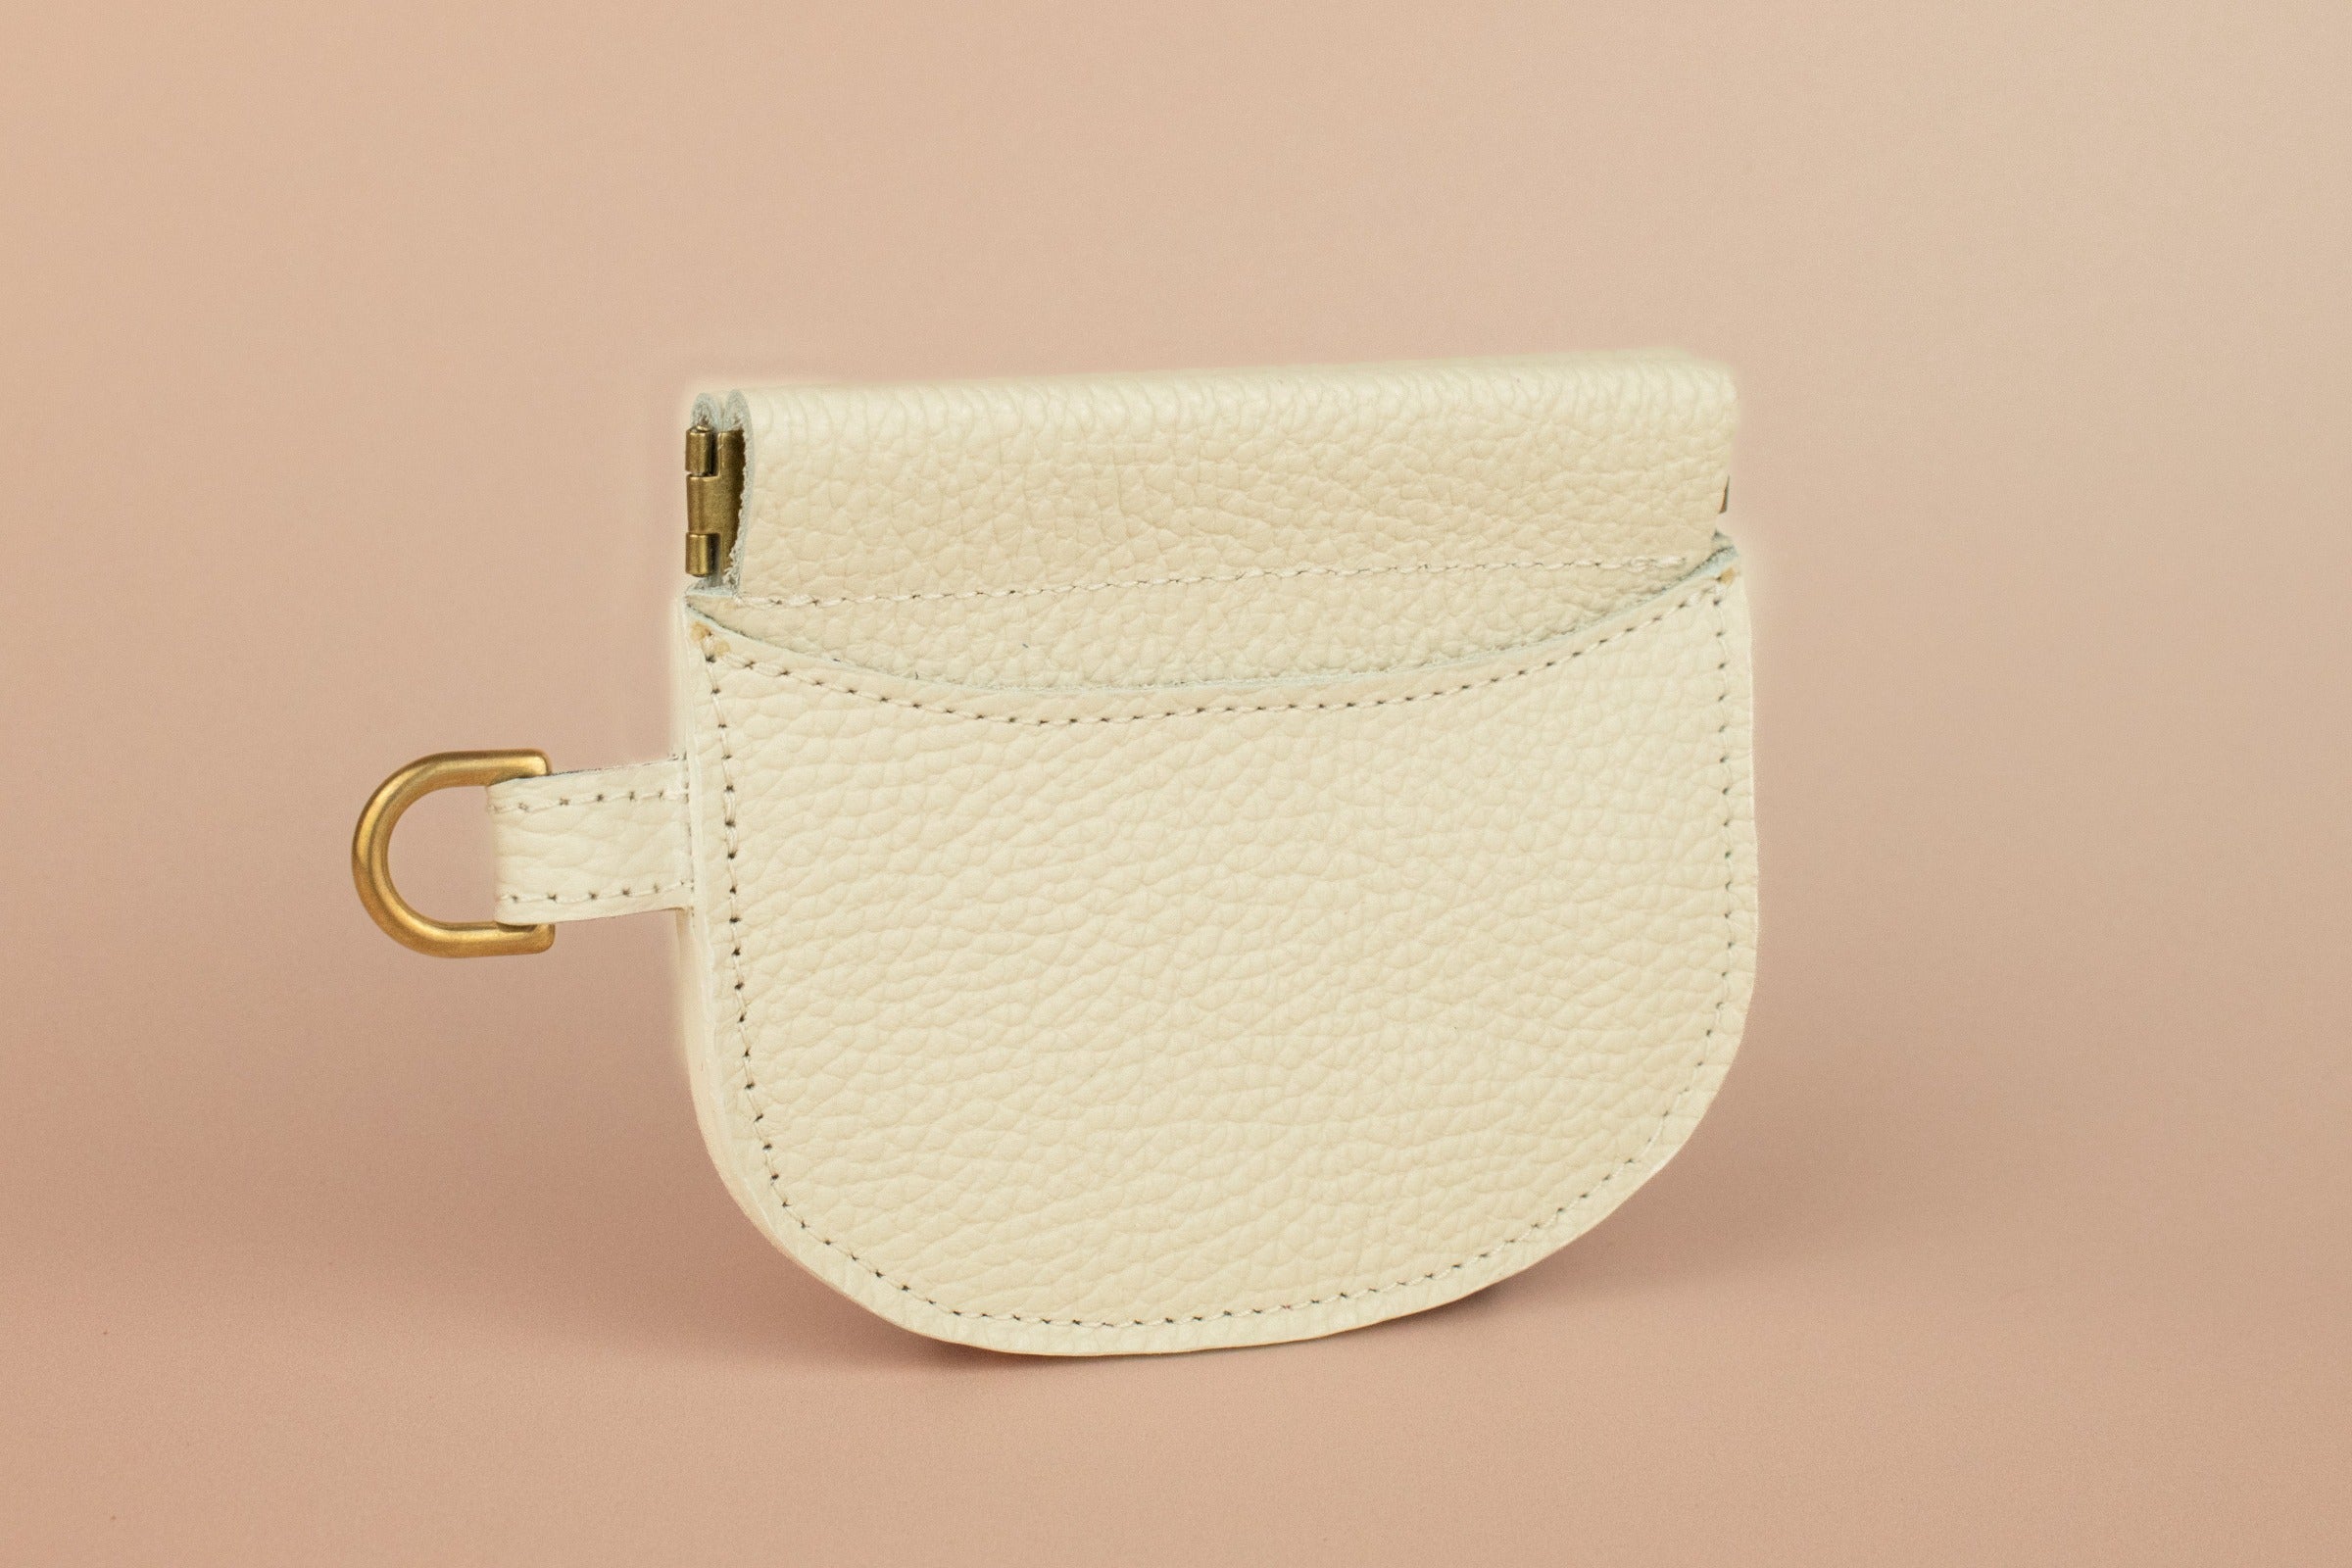 small minimal handmade leather wallet with gold hardware by cold gold, squeeze clasp wristlet wallet